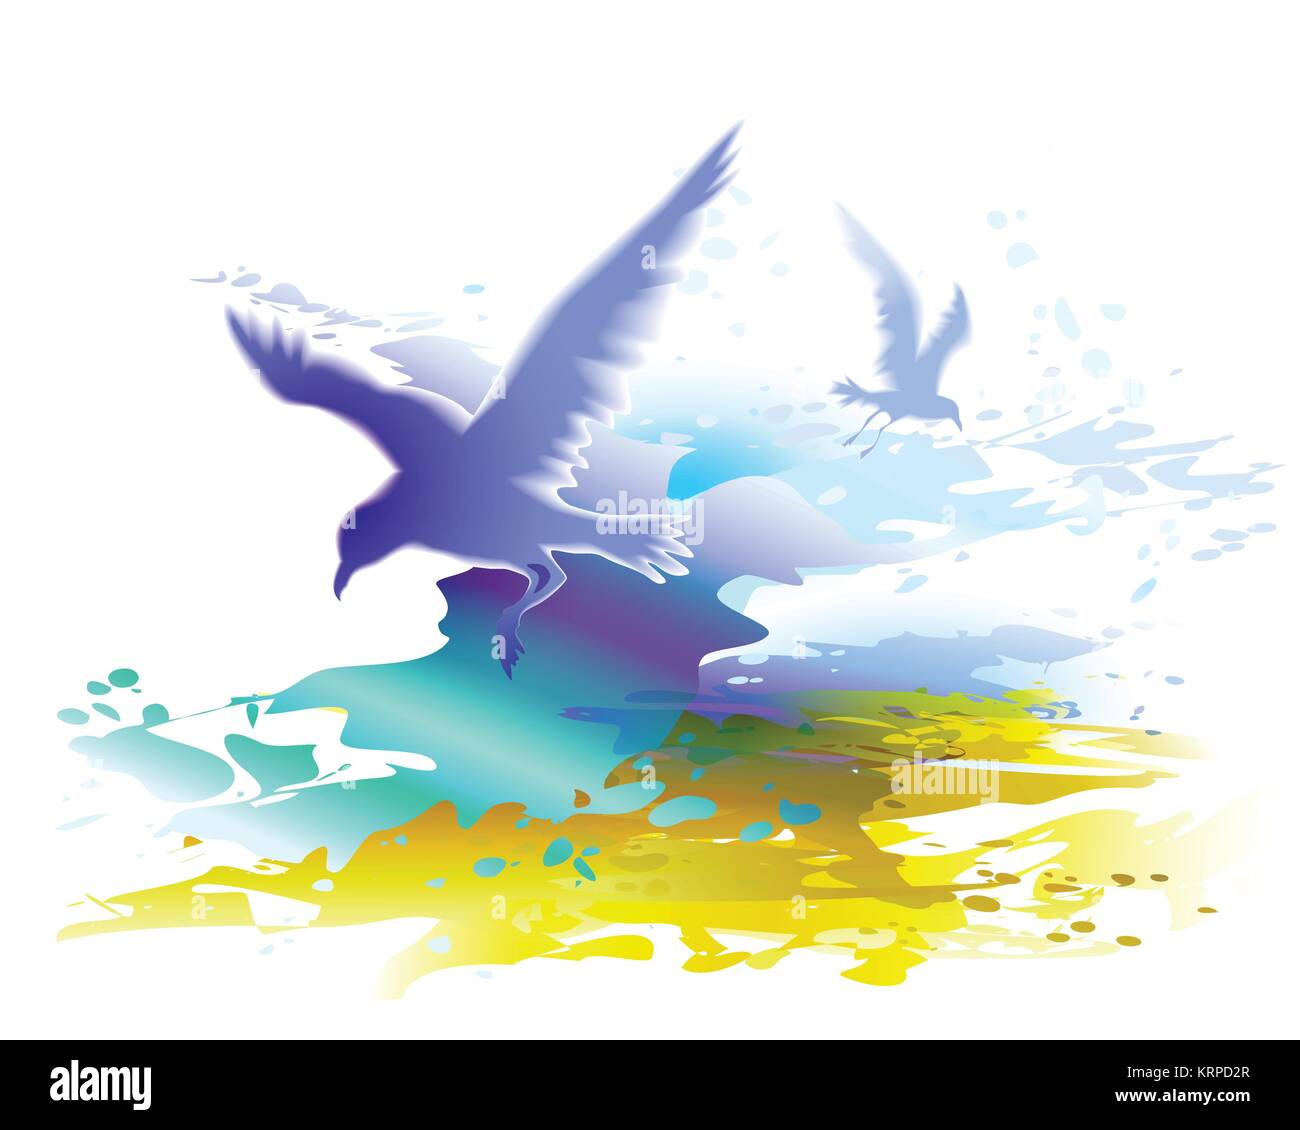 Birds flying and ocean waves. Seascape. Vector illustration. Blue water. Digital watercolor painting. Stock Vector